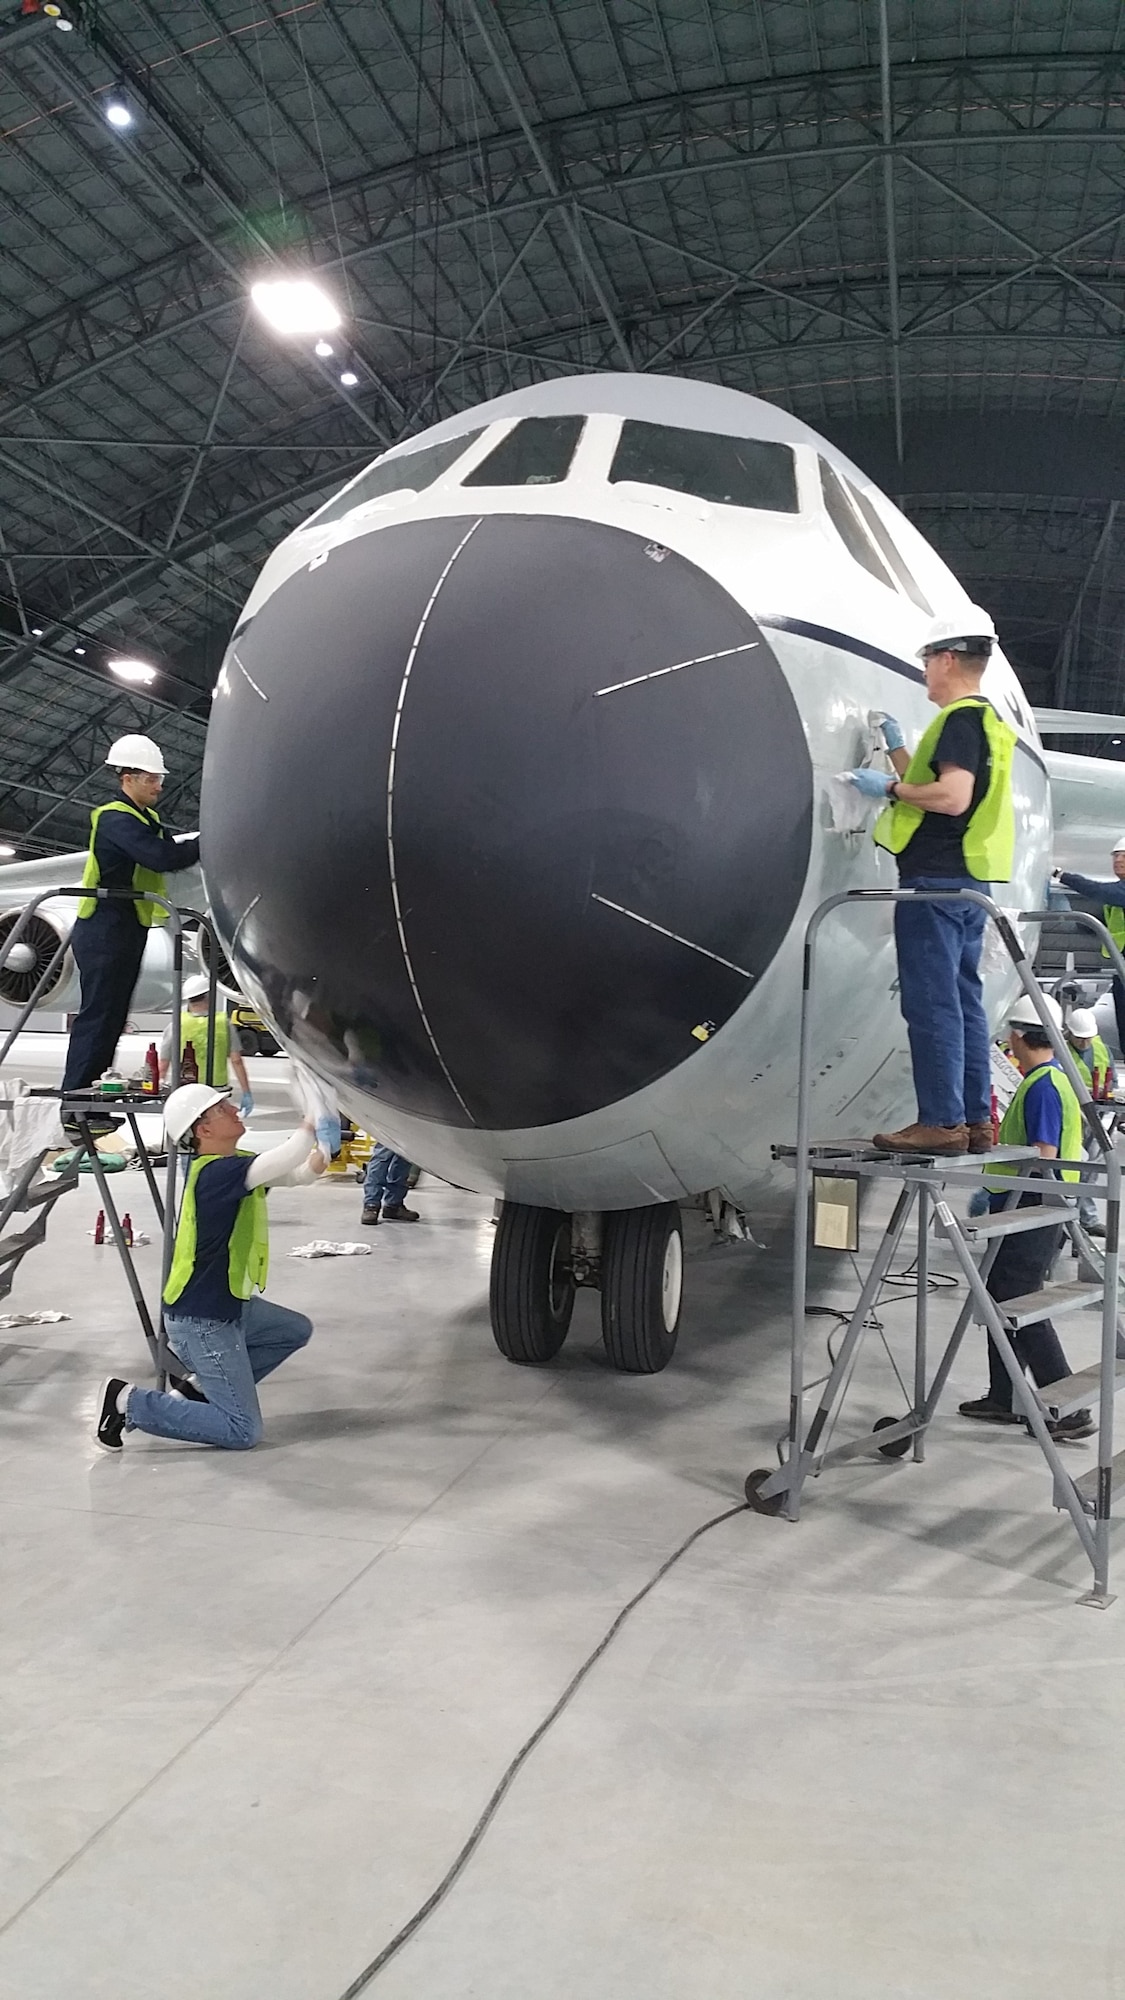 Volunteers cleaning and polishing the C-141 Starlifter "Hanoi Taxi" on January 28, 2016. The work is being done in preparation for the museum's new fourth building, which opens June 8th.